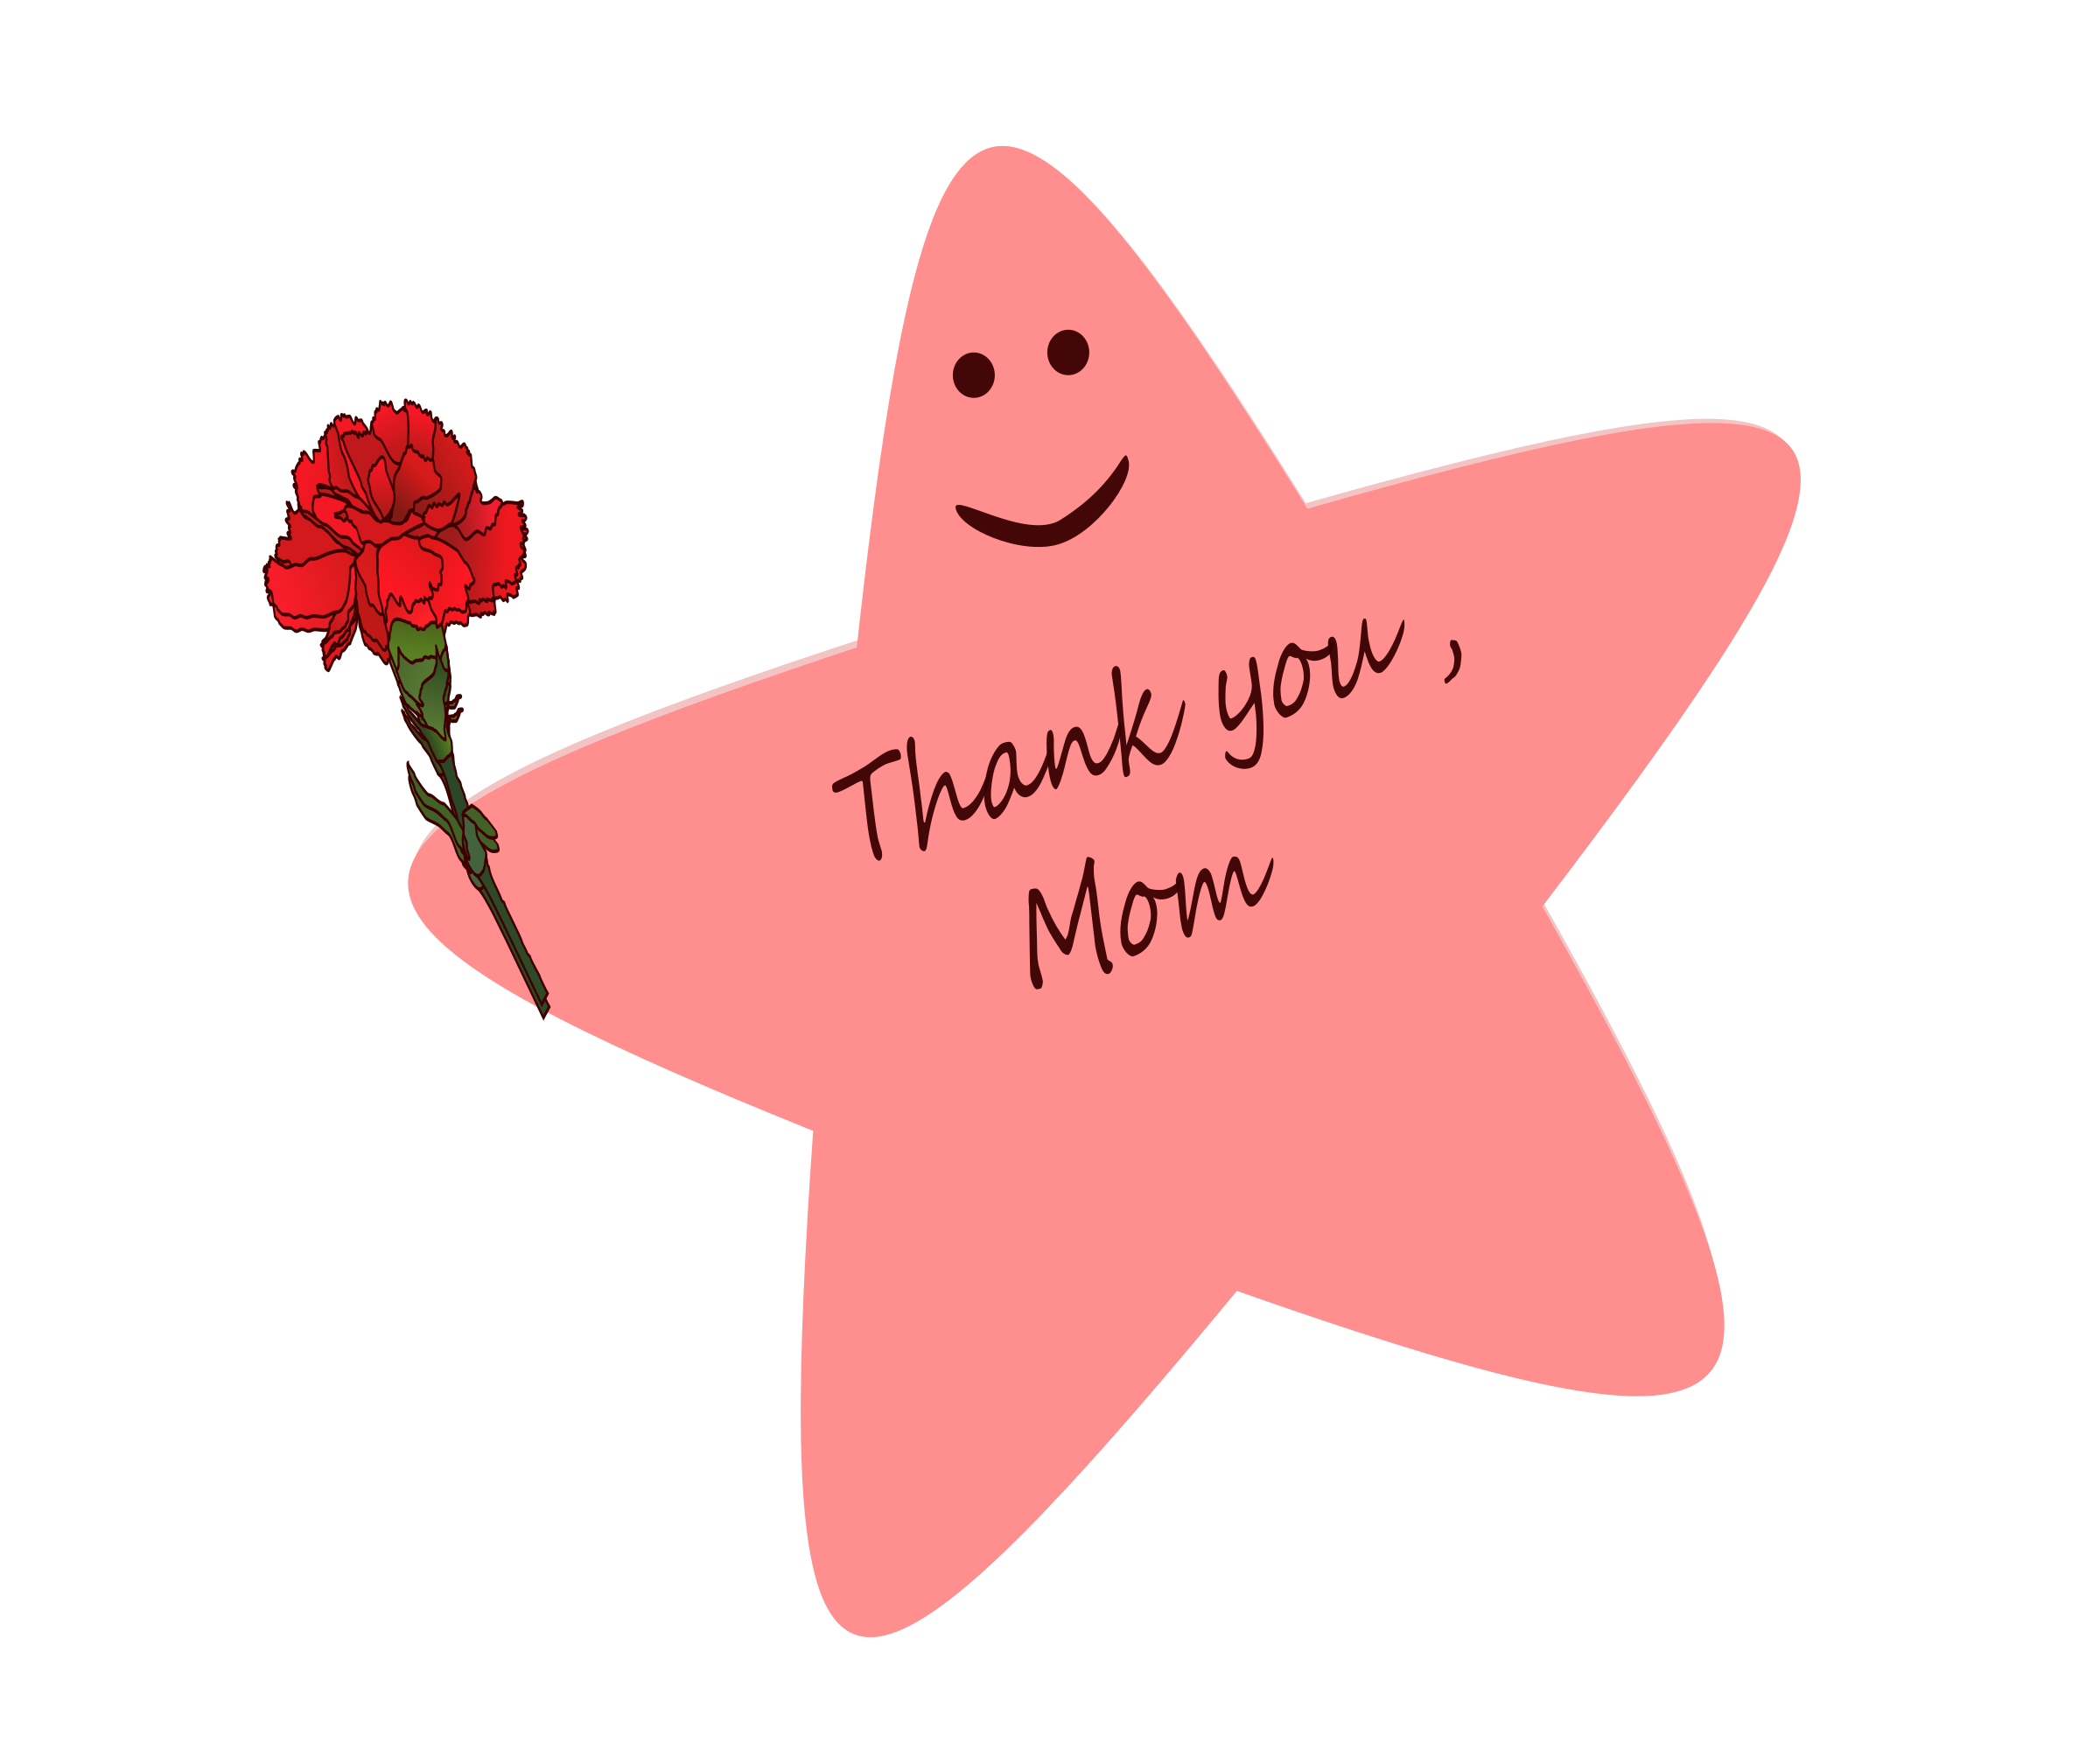 mom clipart mother's day